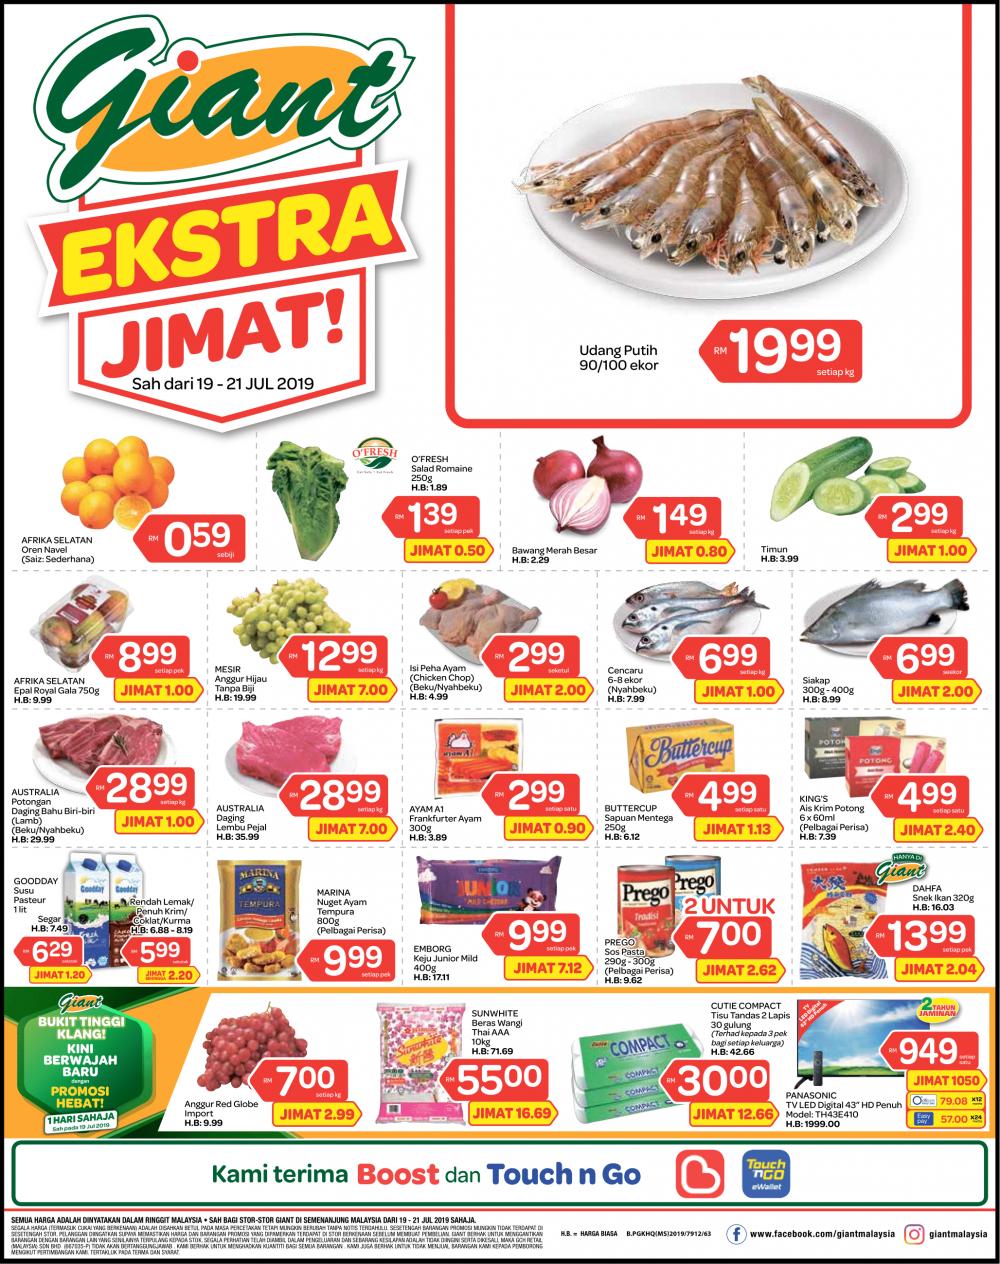 Giant Fresh Items Promotion (19 July 2019 - 21 July 2019)